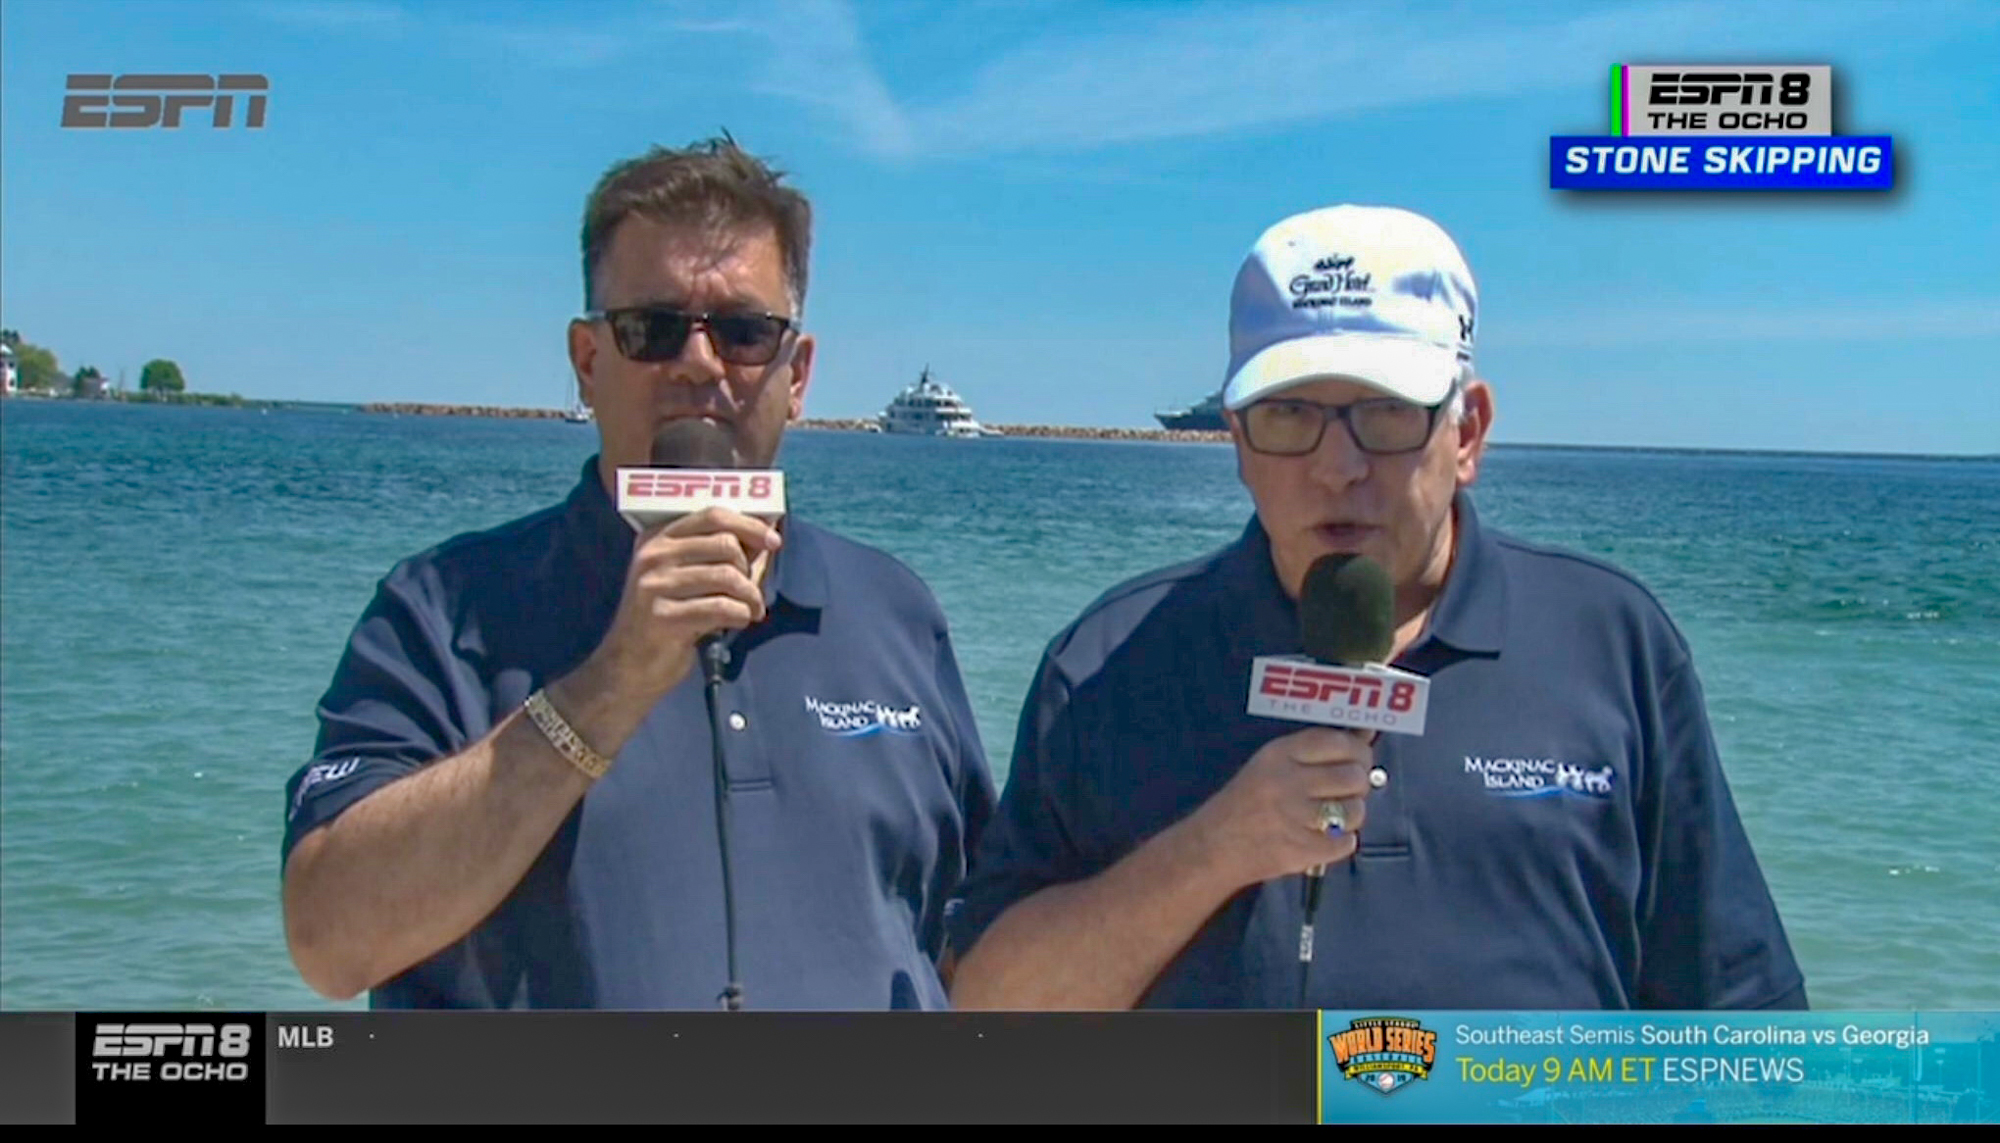 A screenshot from ESPN's airing of the Mackinac Island Stone Skipping Tournament, with Eric Steiner and Paul W. Smith on the call.